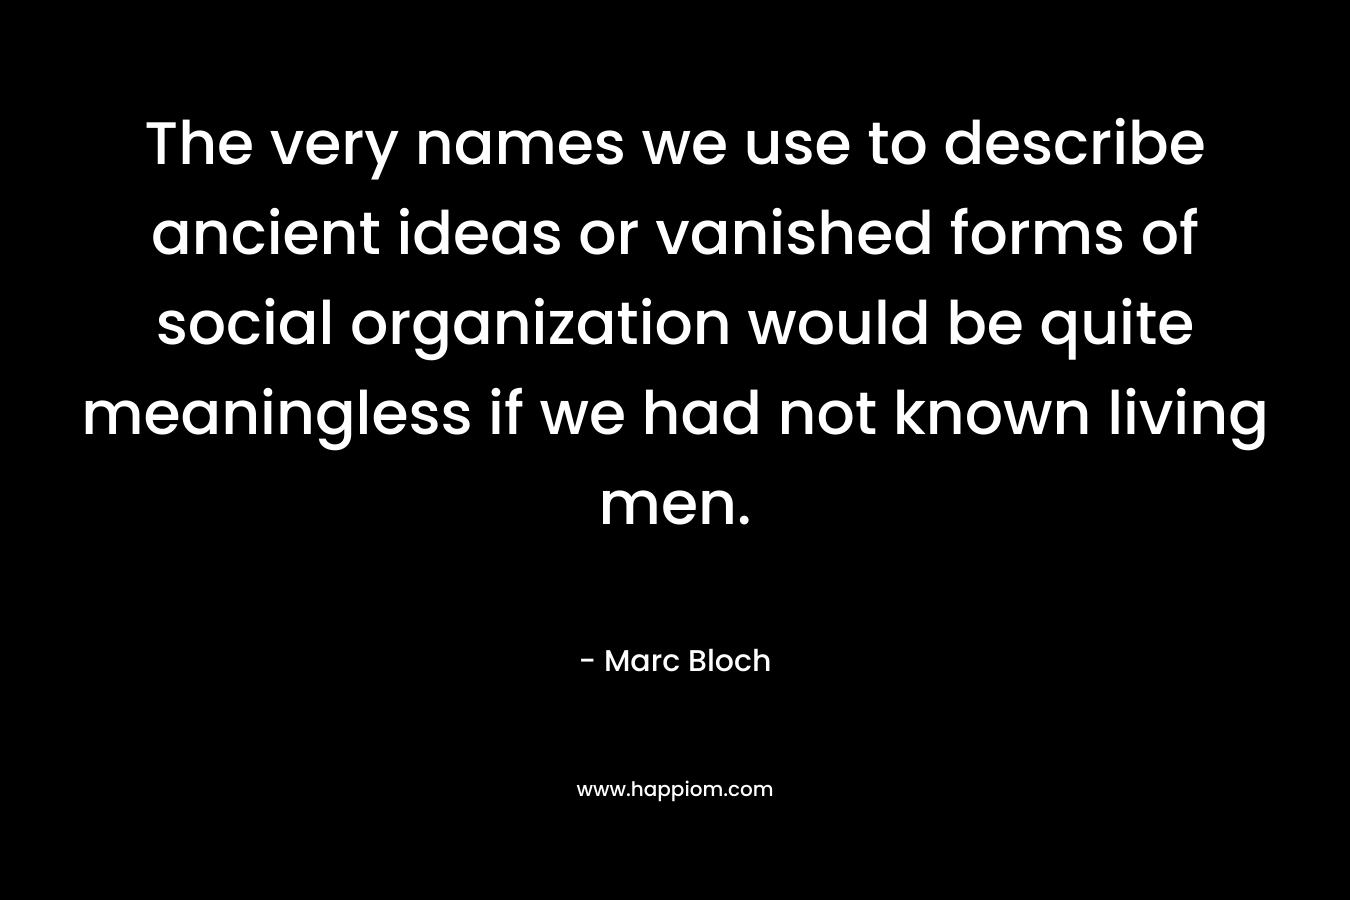 The very names we use to describe ancient ideas or vanished forms of social organization would be quite meaningless if we had not known living men.